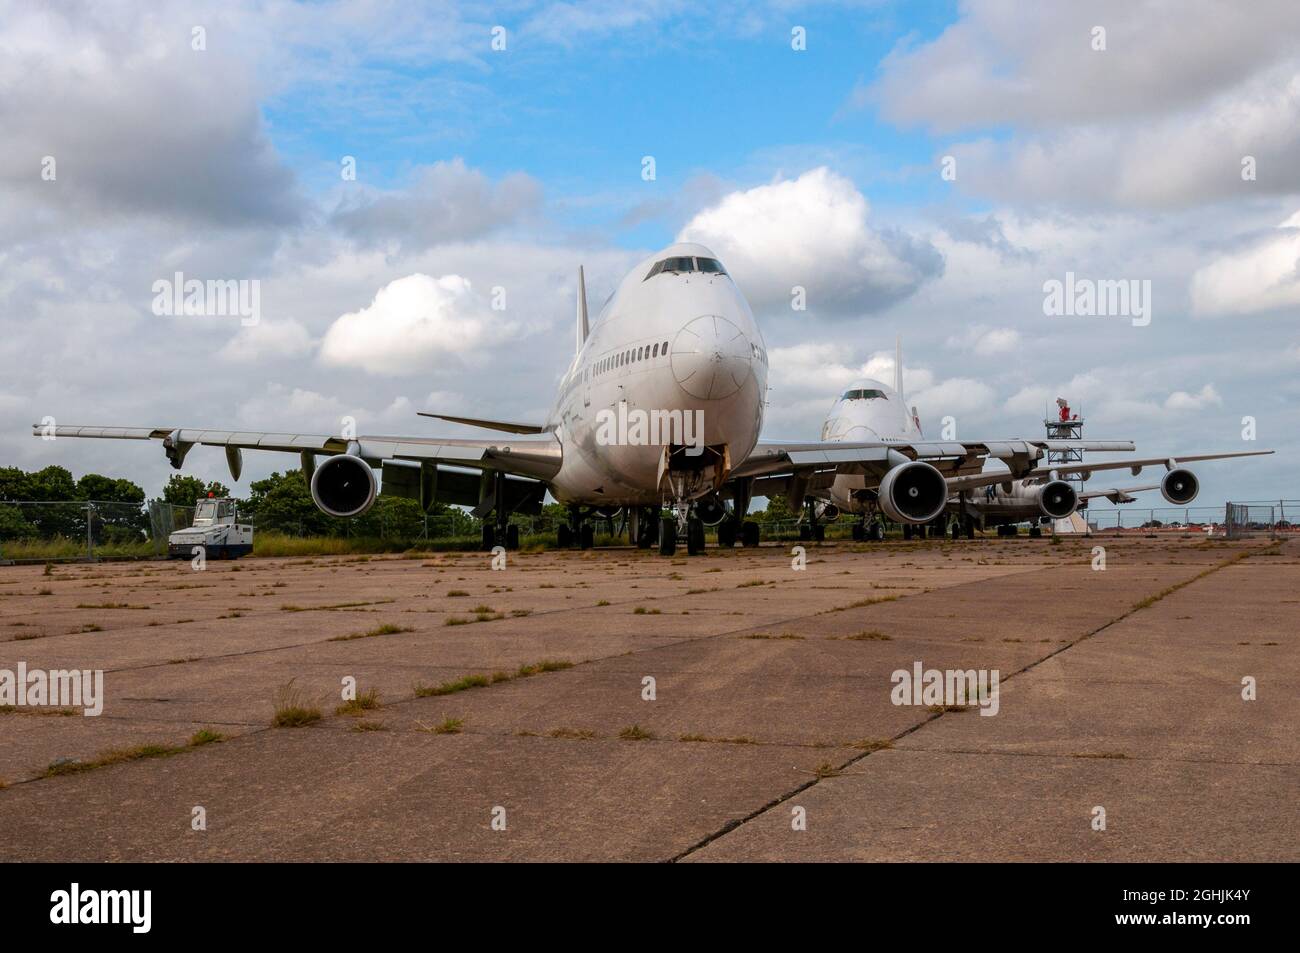 Retired Boeing 747 Jumbo jet airliner planes stored and having had items removed. Manston Airport boneyard, scrapping likely. Surplus airliners Stock Photo